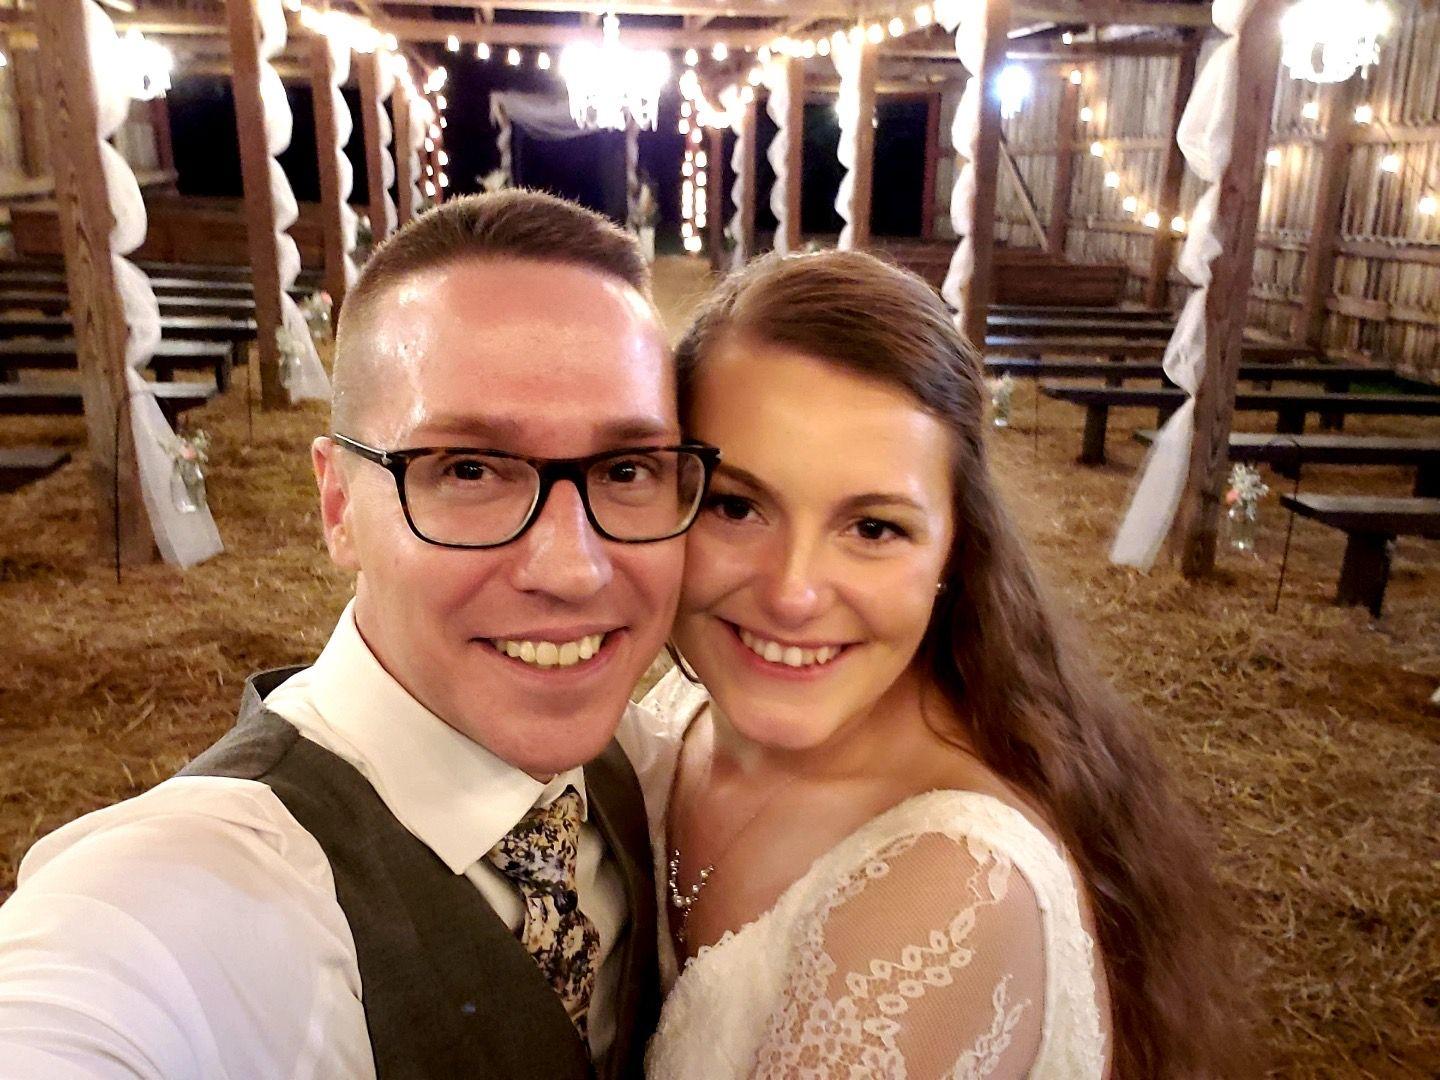 Jodi and Dustin Collins in the barn following the wedding